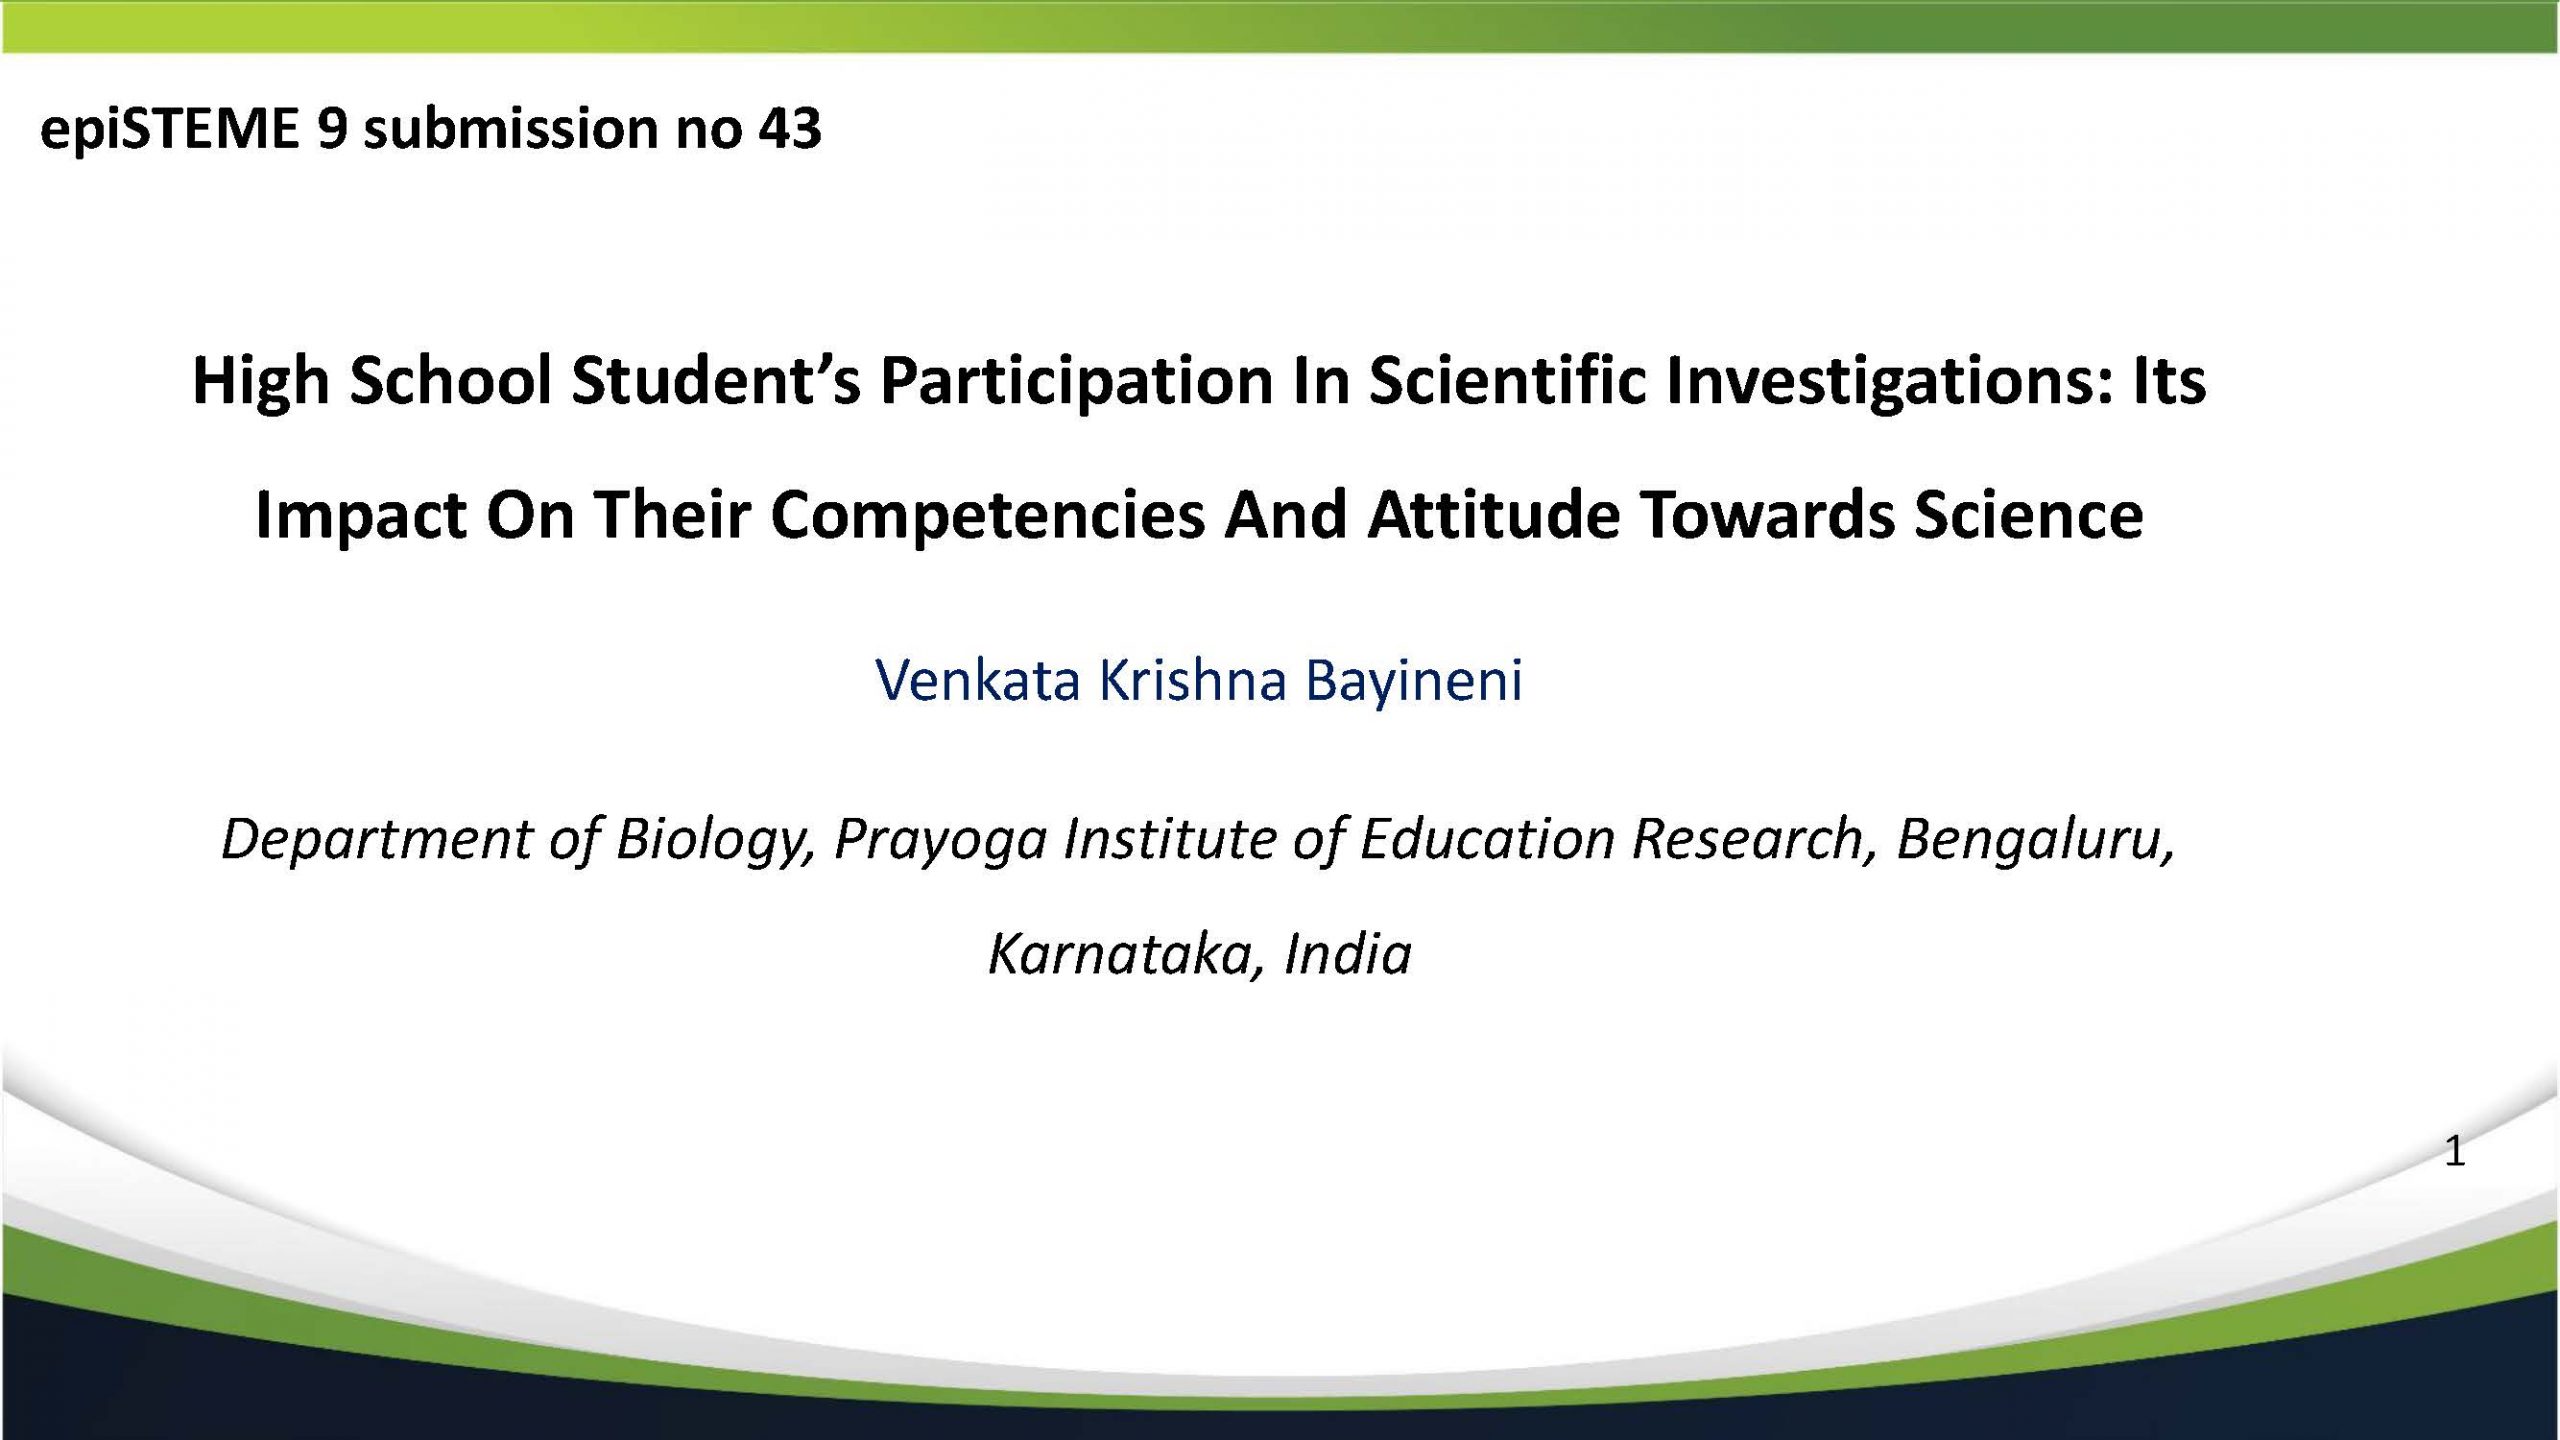 High School Student’s Participation In Scientific Investigations: Its Impact On Their Competencies And Attitude Towards Science